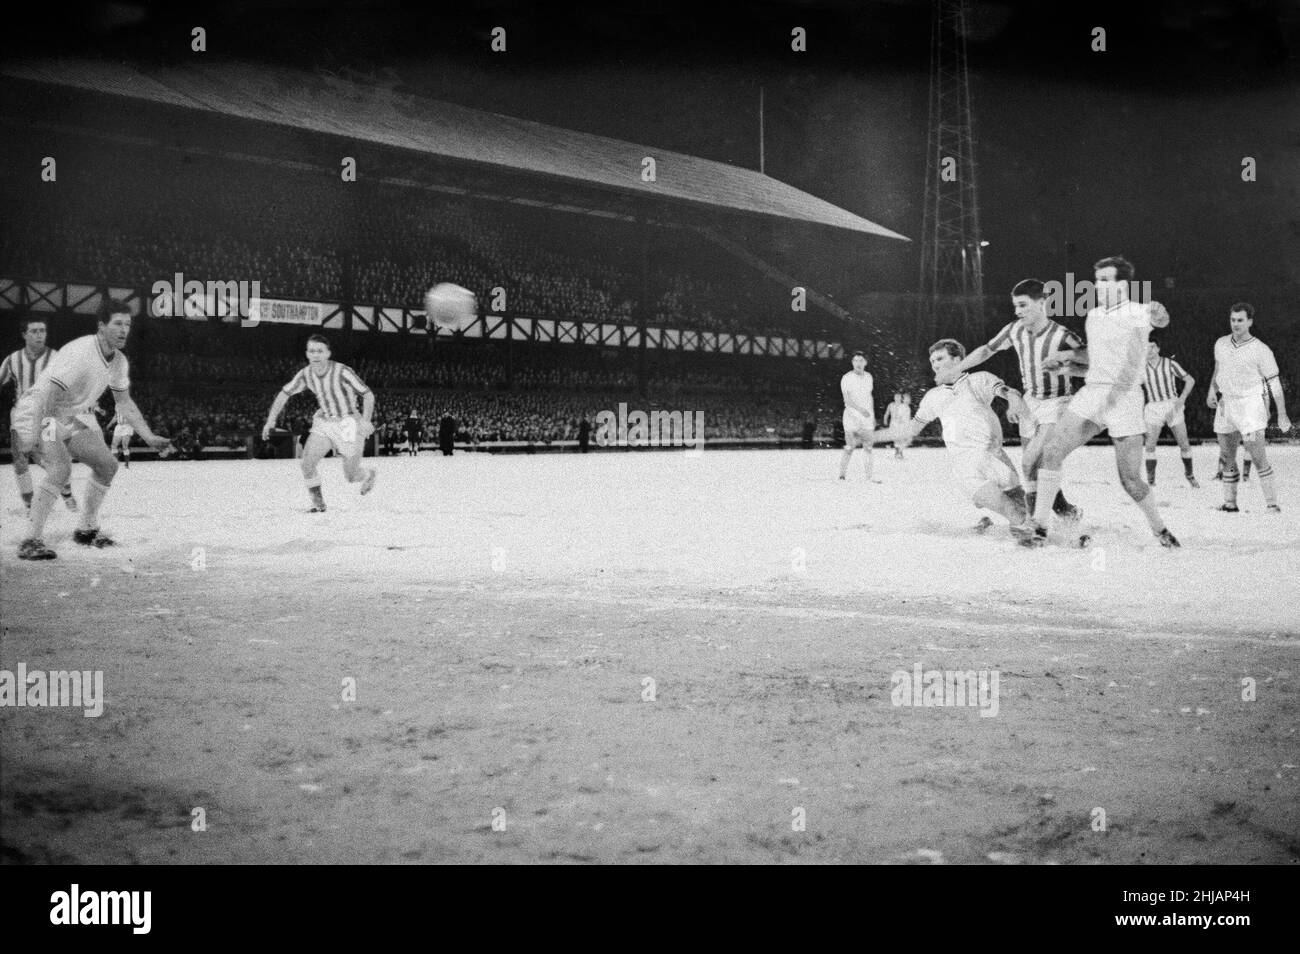 Sunderland 2 - 5 Gravesend fourth round FA Cup replay held at Roker Park. Sunderland's Johnny Crossan scores his second and Sunderland's fourth goal in the 43rd minute. 18th February 1963. Stock Photo